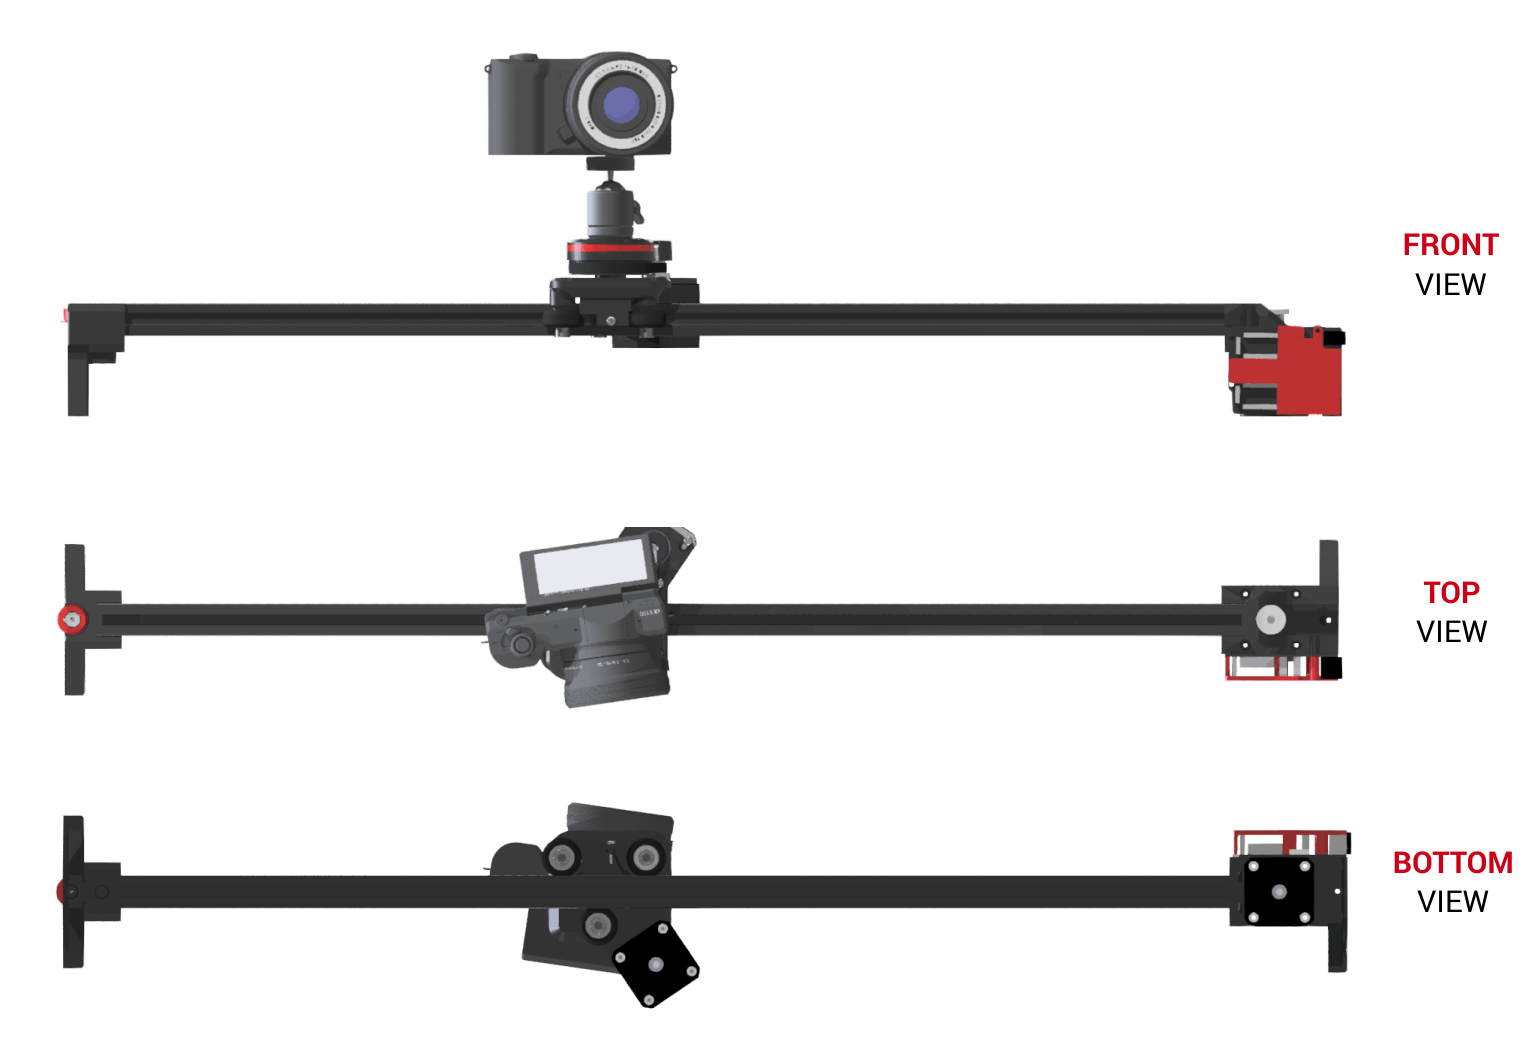 Motorized and remotely controlled camera slider (with object tracking)